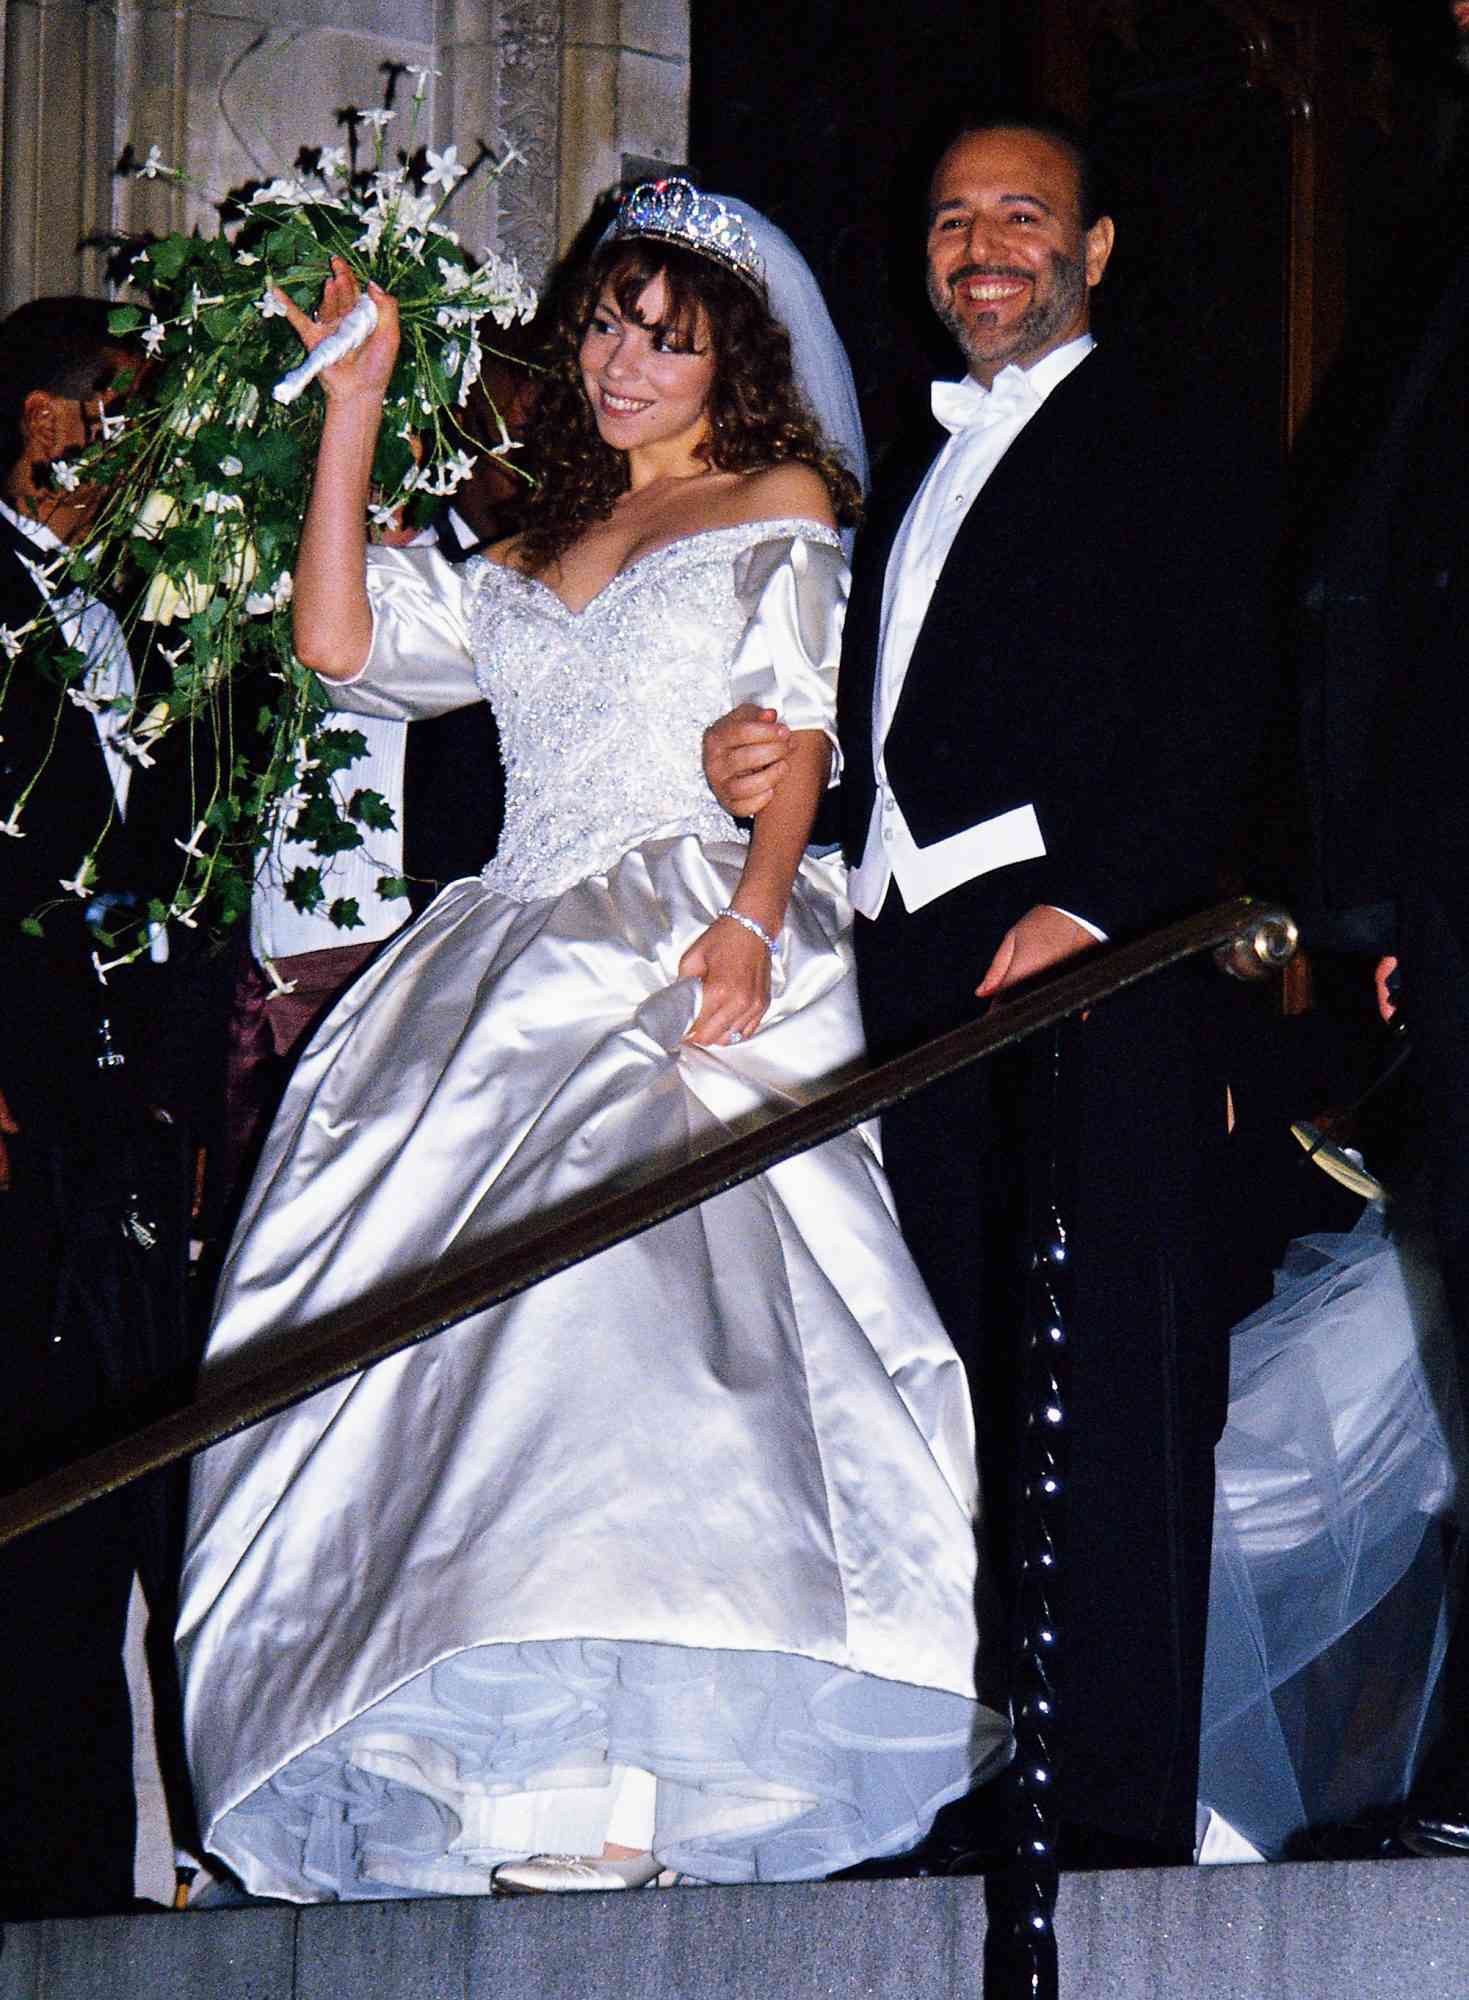 The Wedding of Mariah Carey and Tommy Mottola